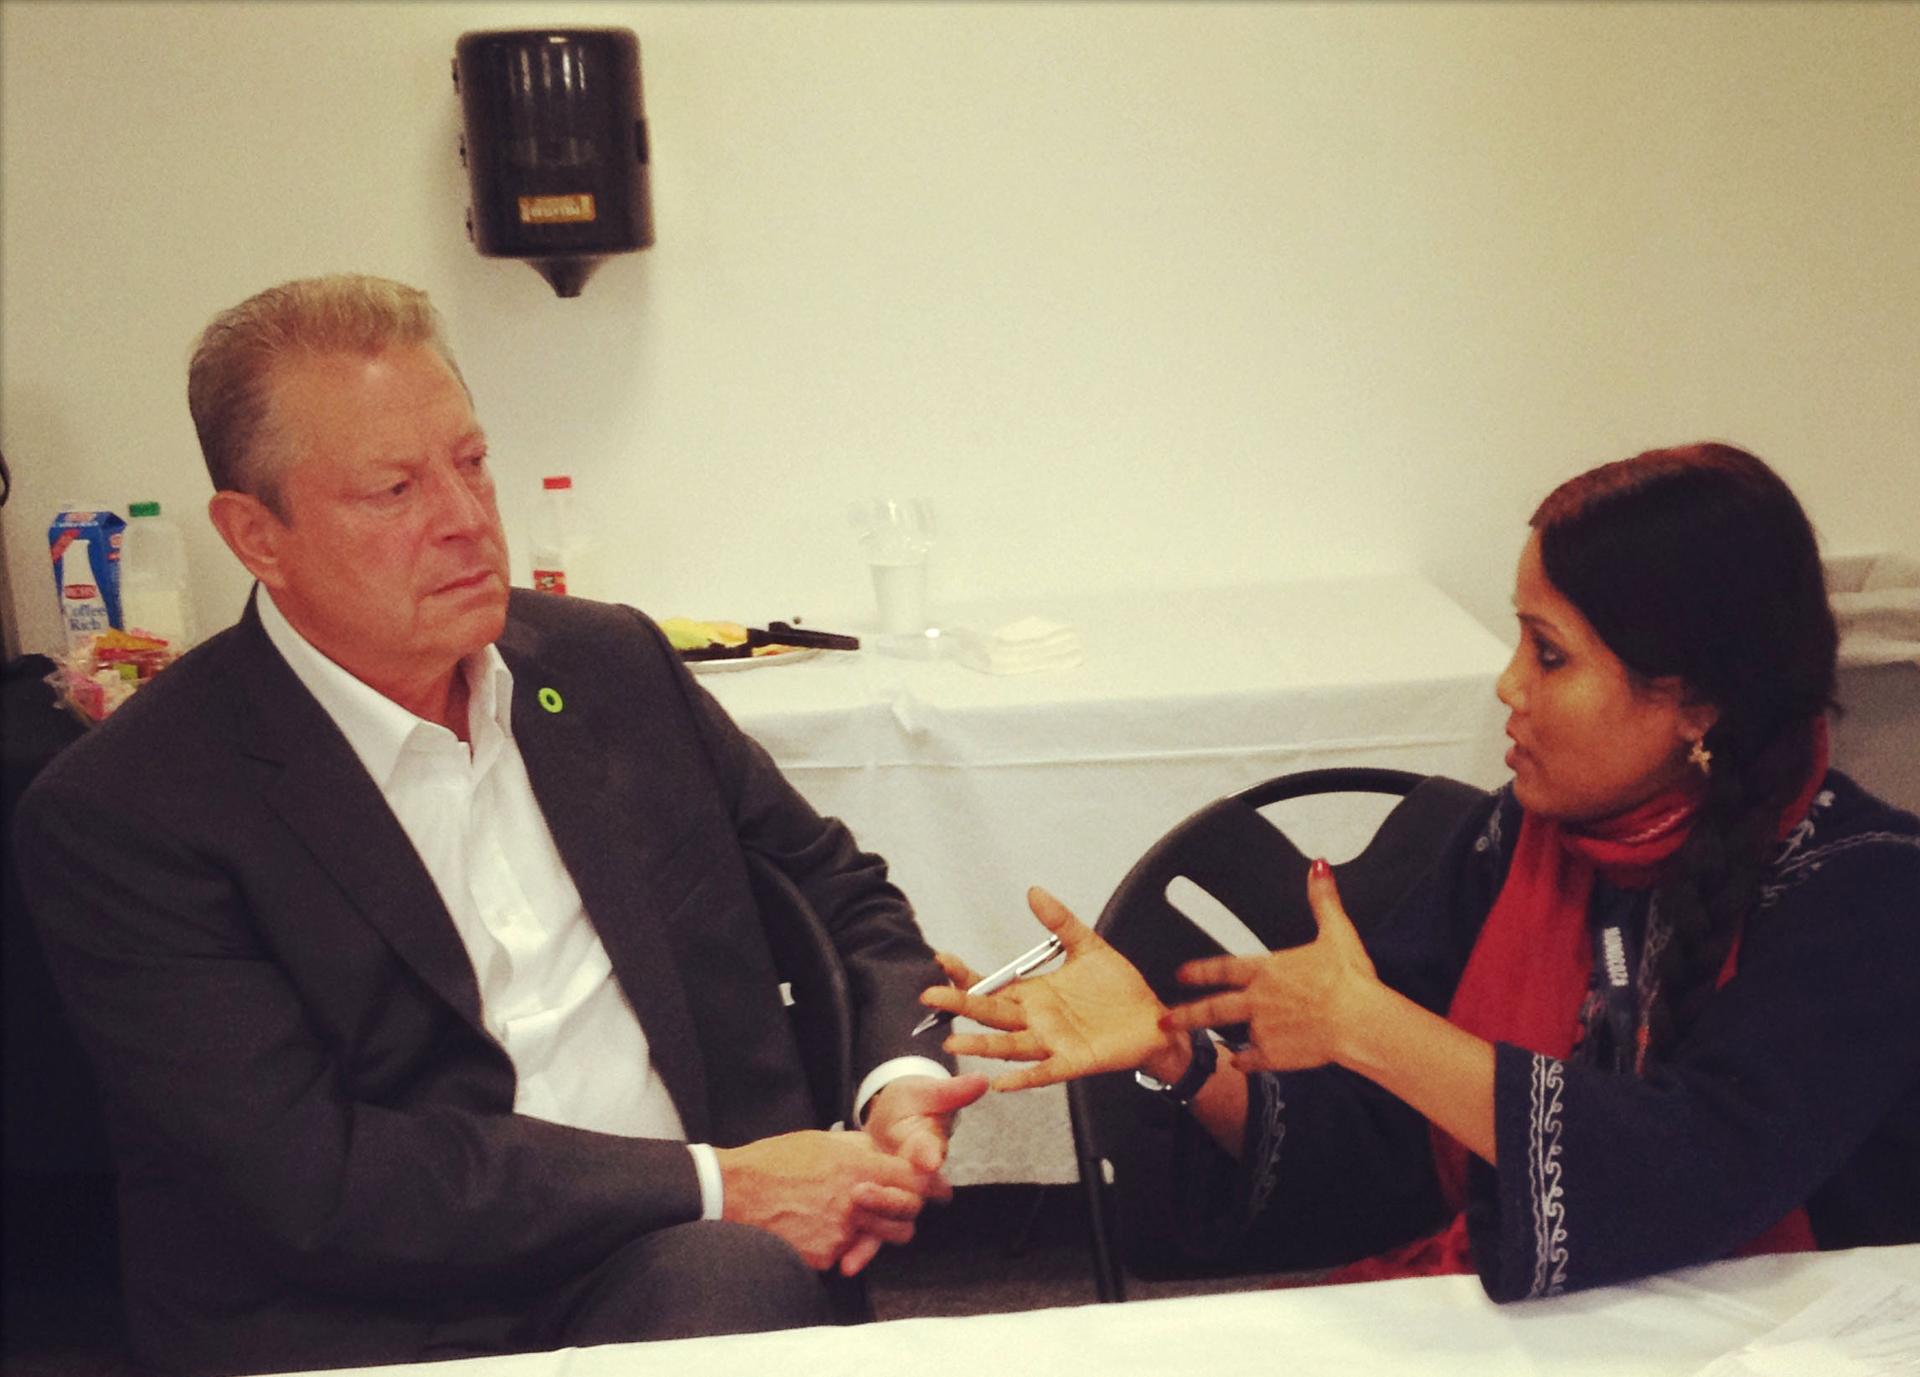 Indian environmental and global affairs journalist Stella Paul asks Al Gore about crop fertilization techniques in India.